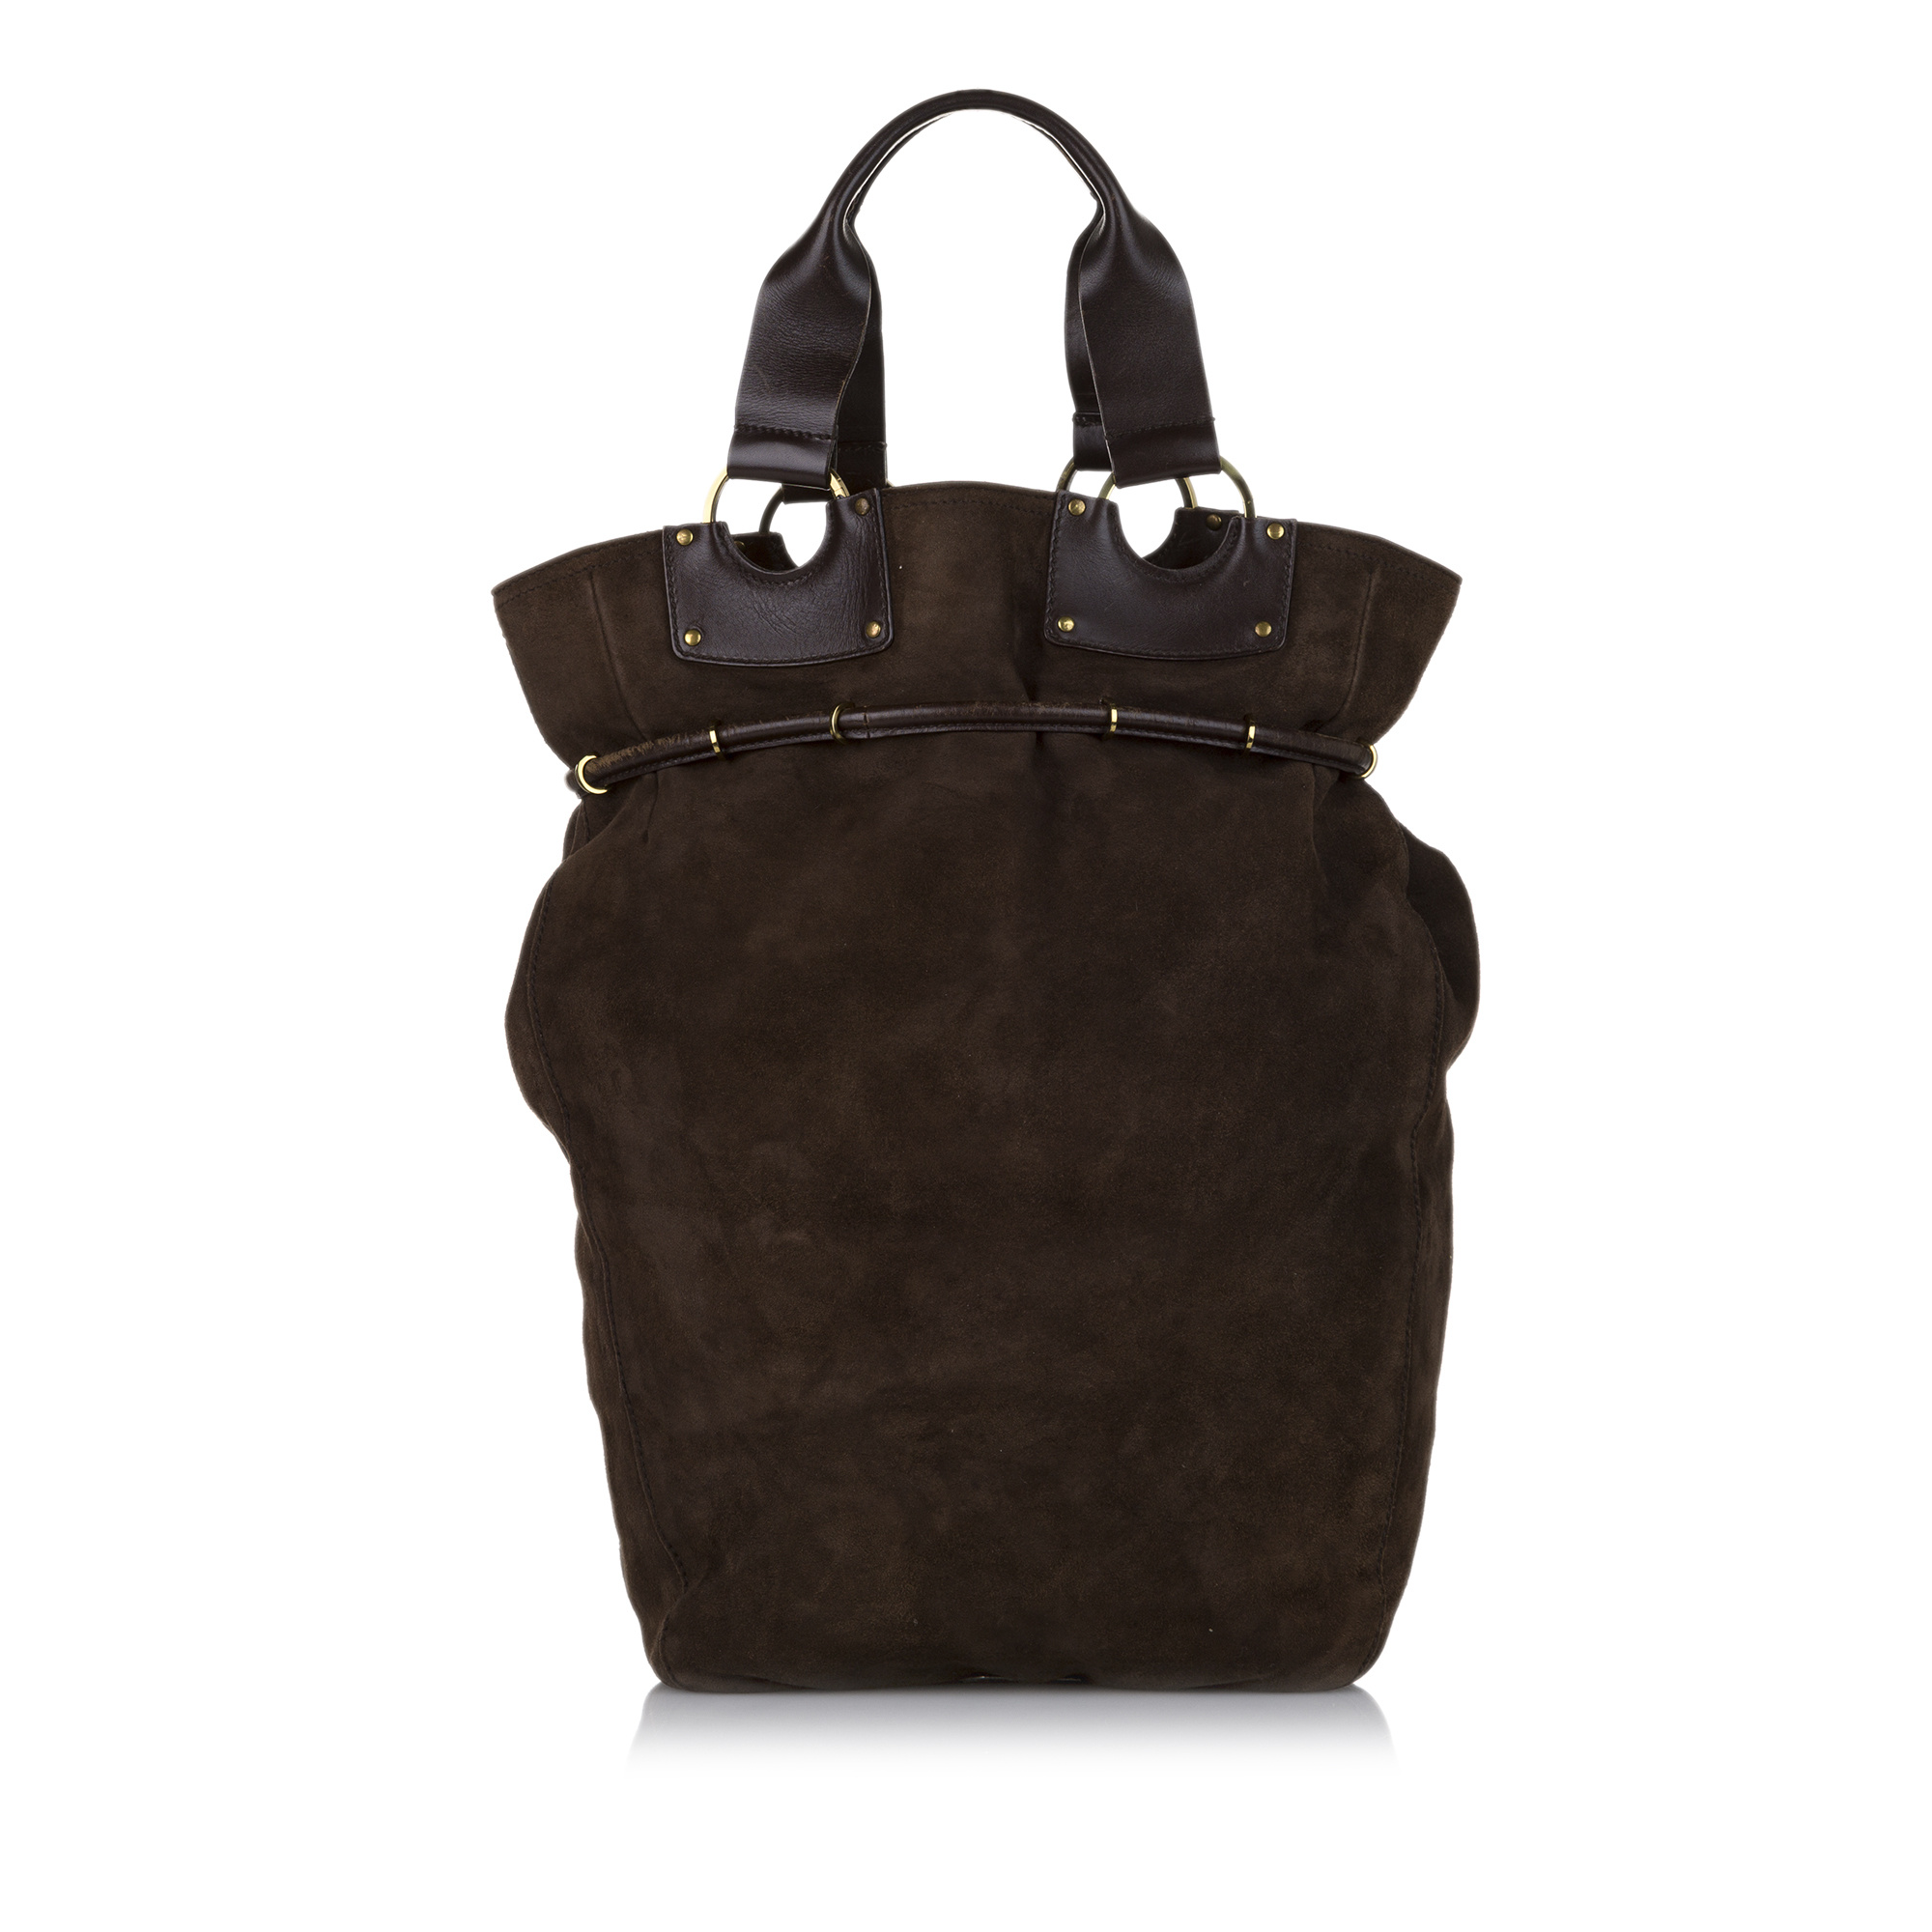 Gucci tote bag in Brown Suede